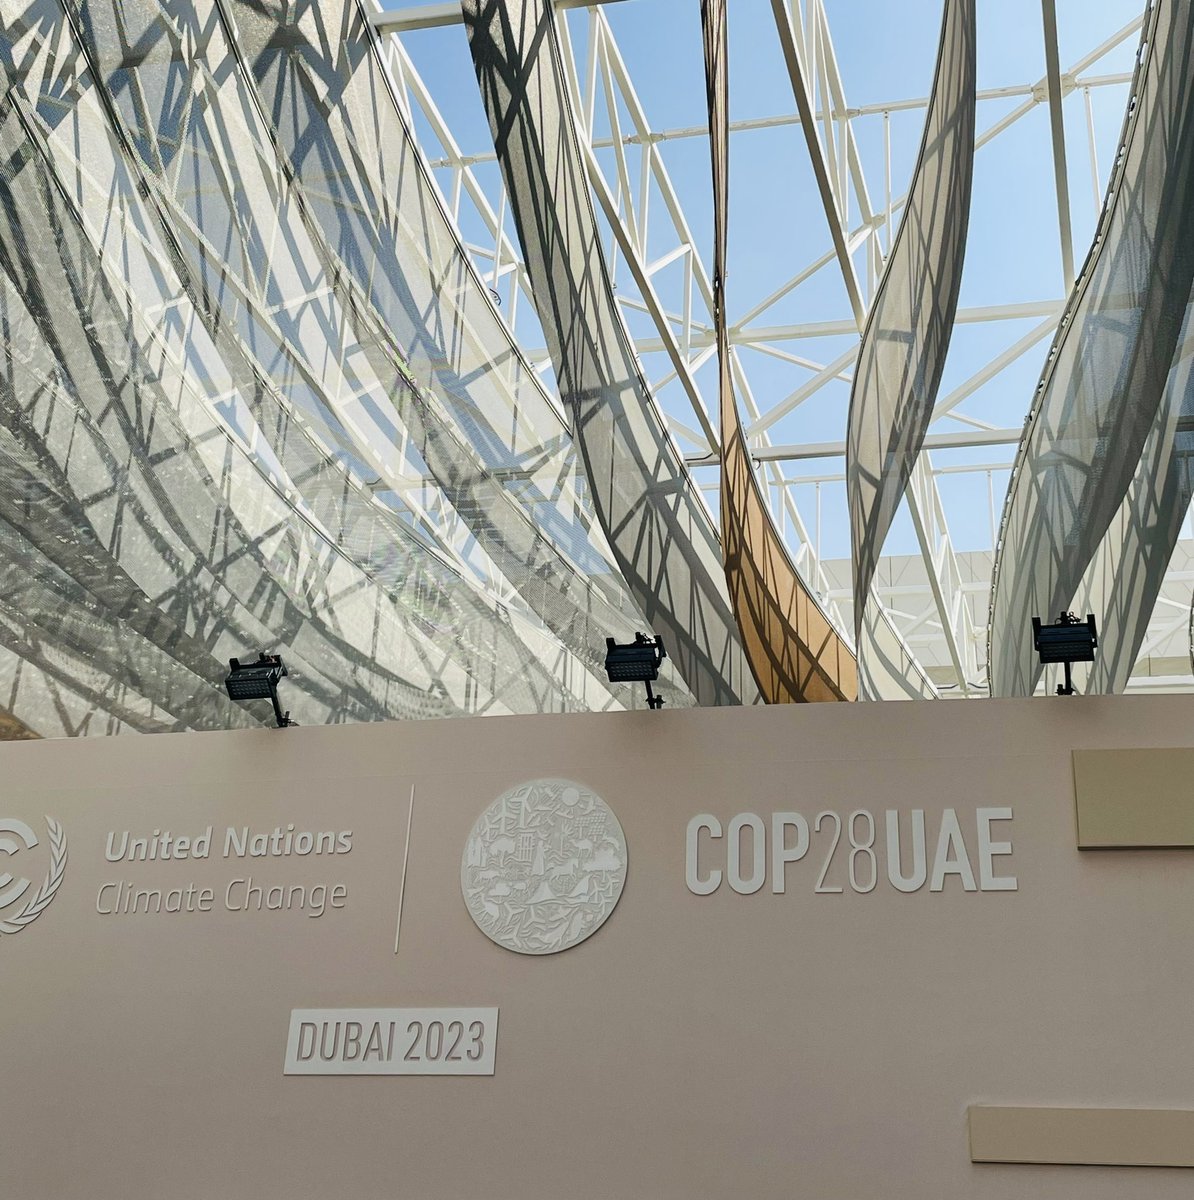 Hello from Dubai. I’ll be here covering COP28 for the next two weeks - do send info/gossip/tips via email or dm!